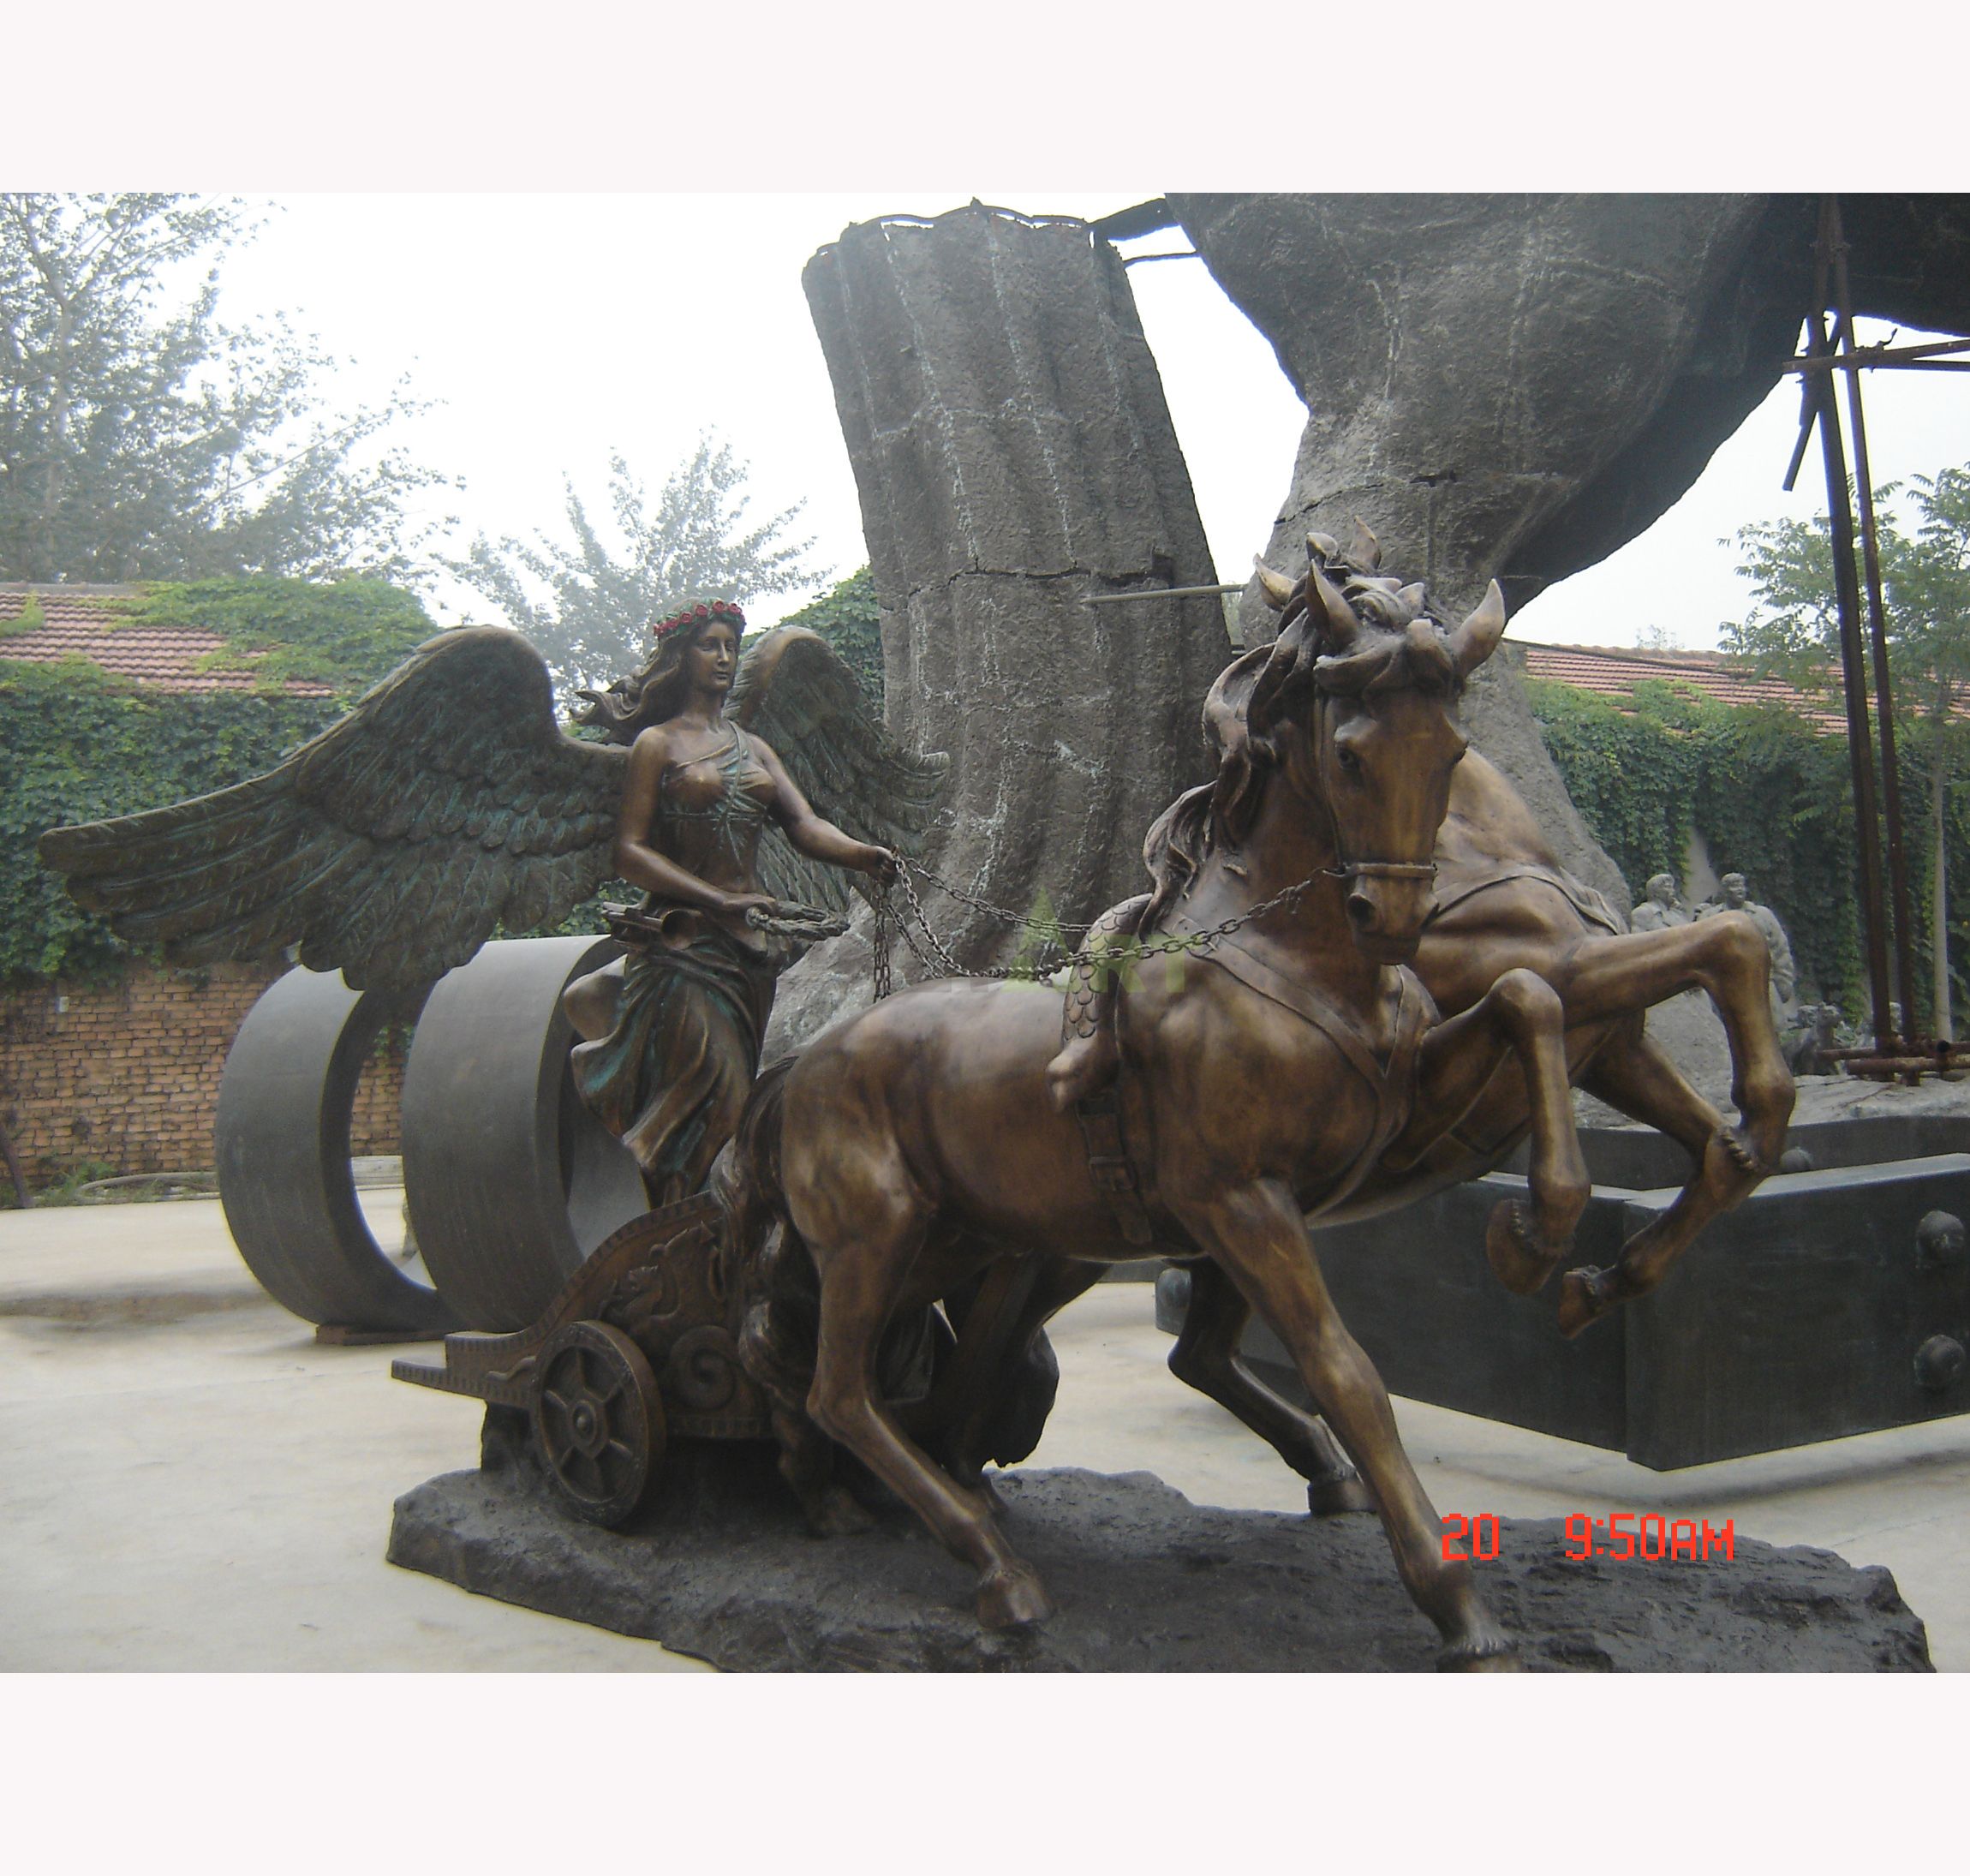 A statue of a heroic angel riding on a horse